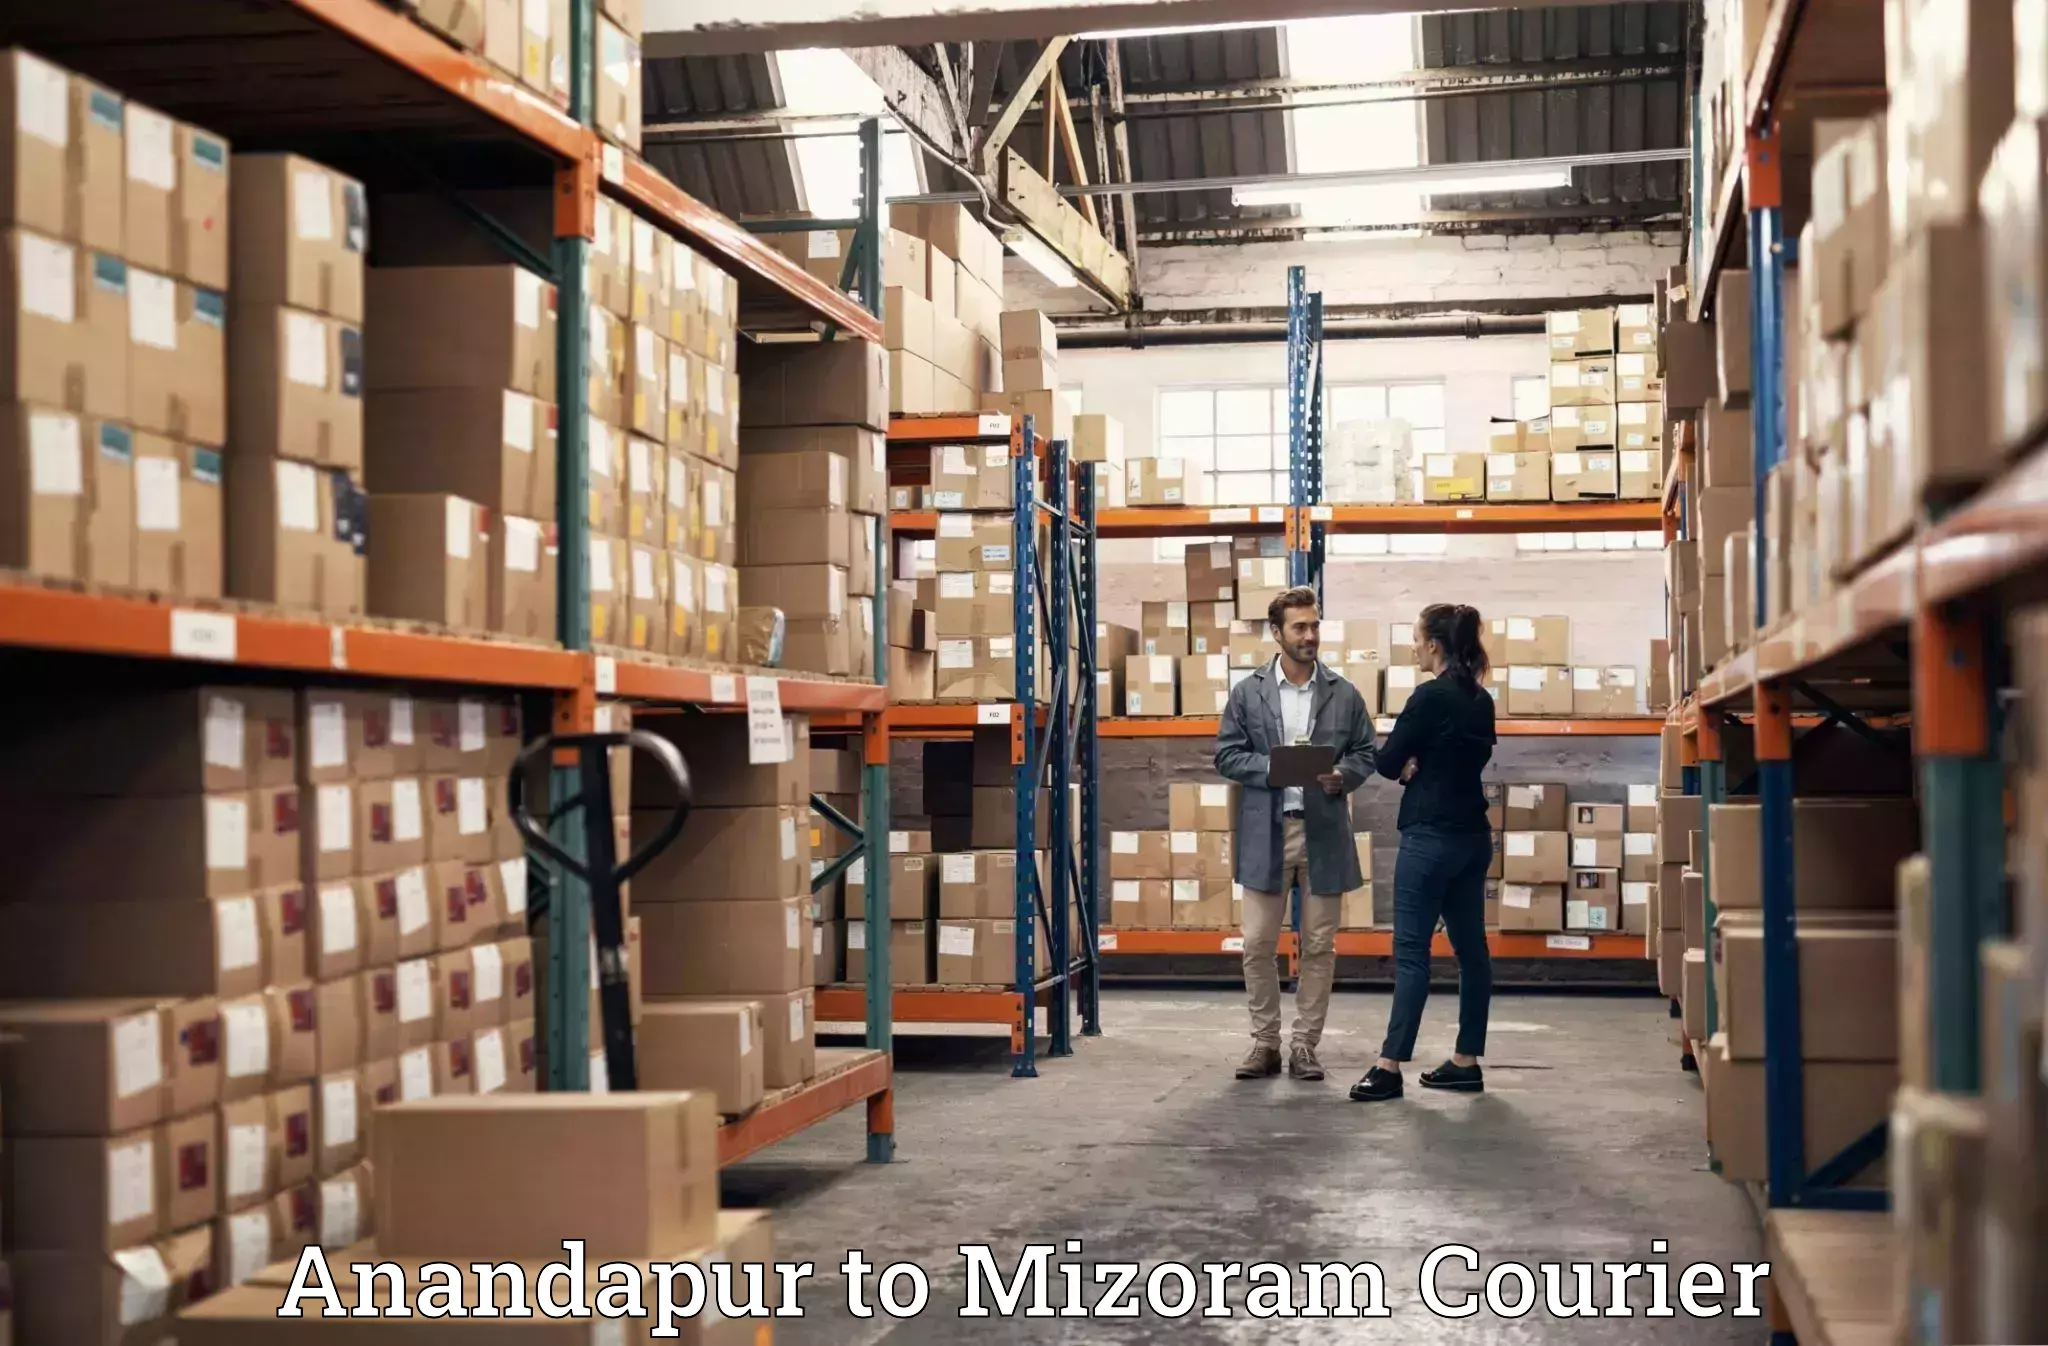 Moving and packing experts in Anandapur to Mizoram